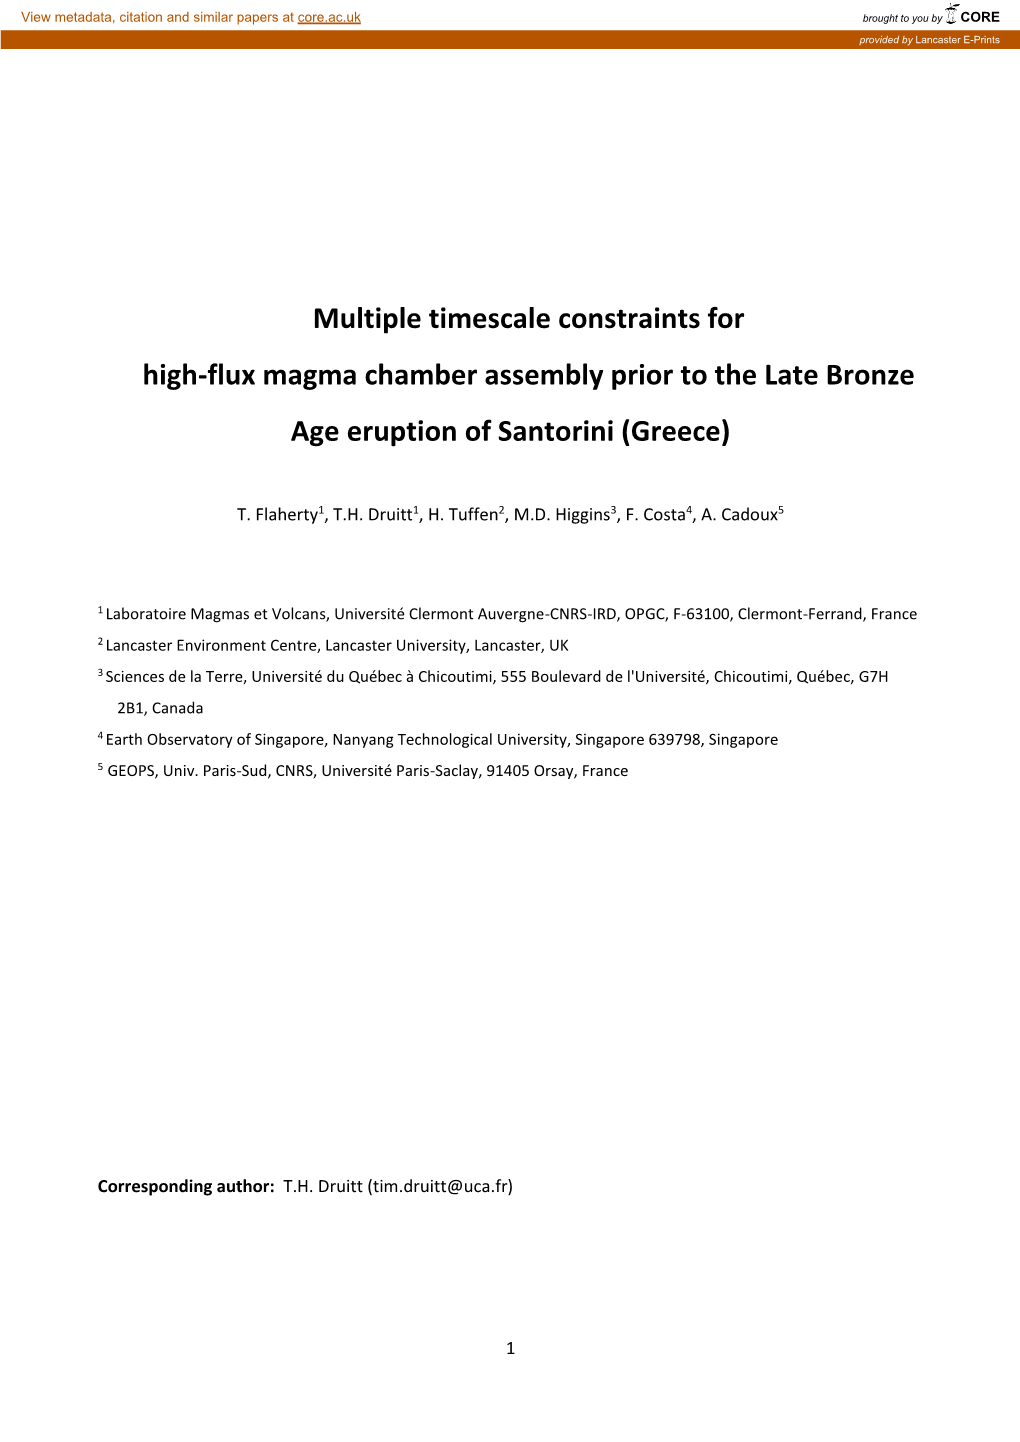 Multiple Timescale Constraints for High-Flux Magma Chamber Assembly Prior to the Late Bronze Age Eruption of Santorini (Greece)